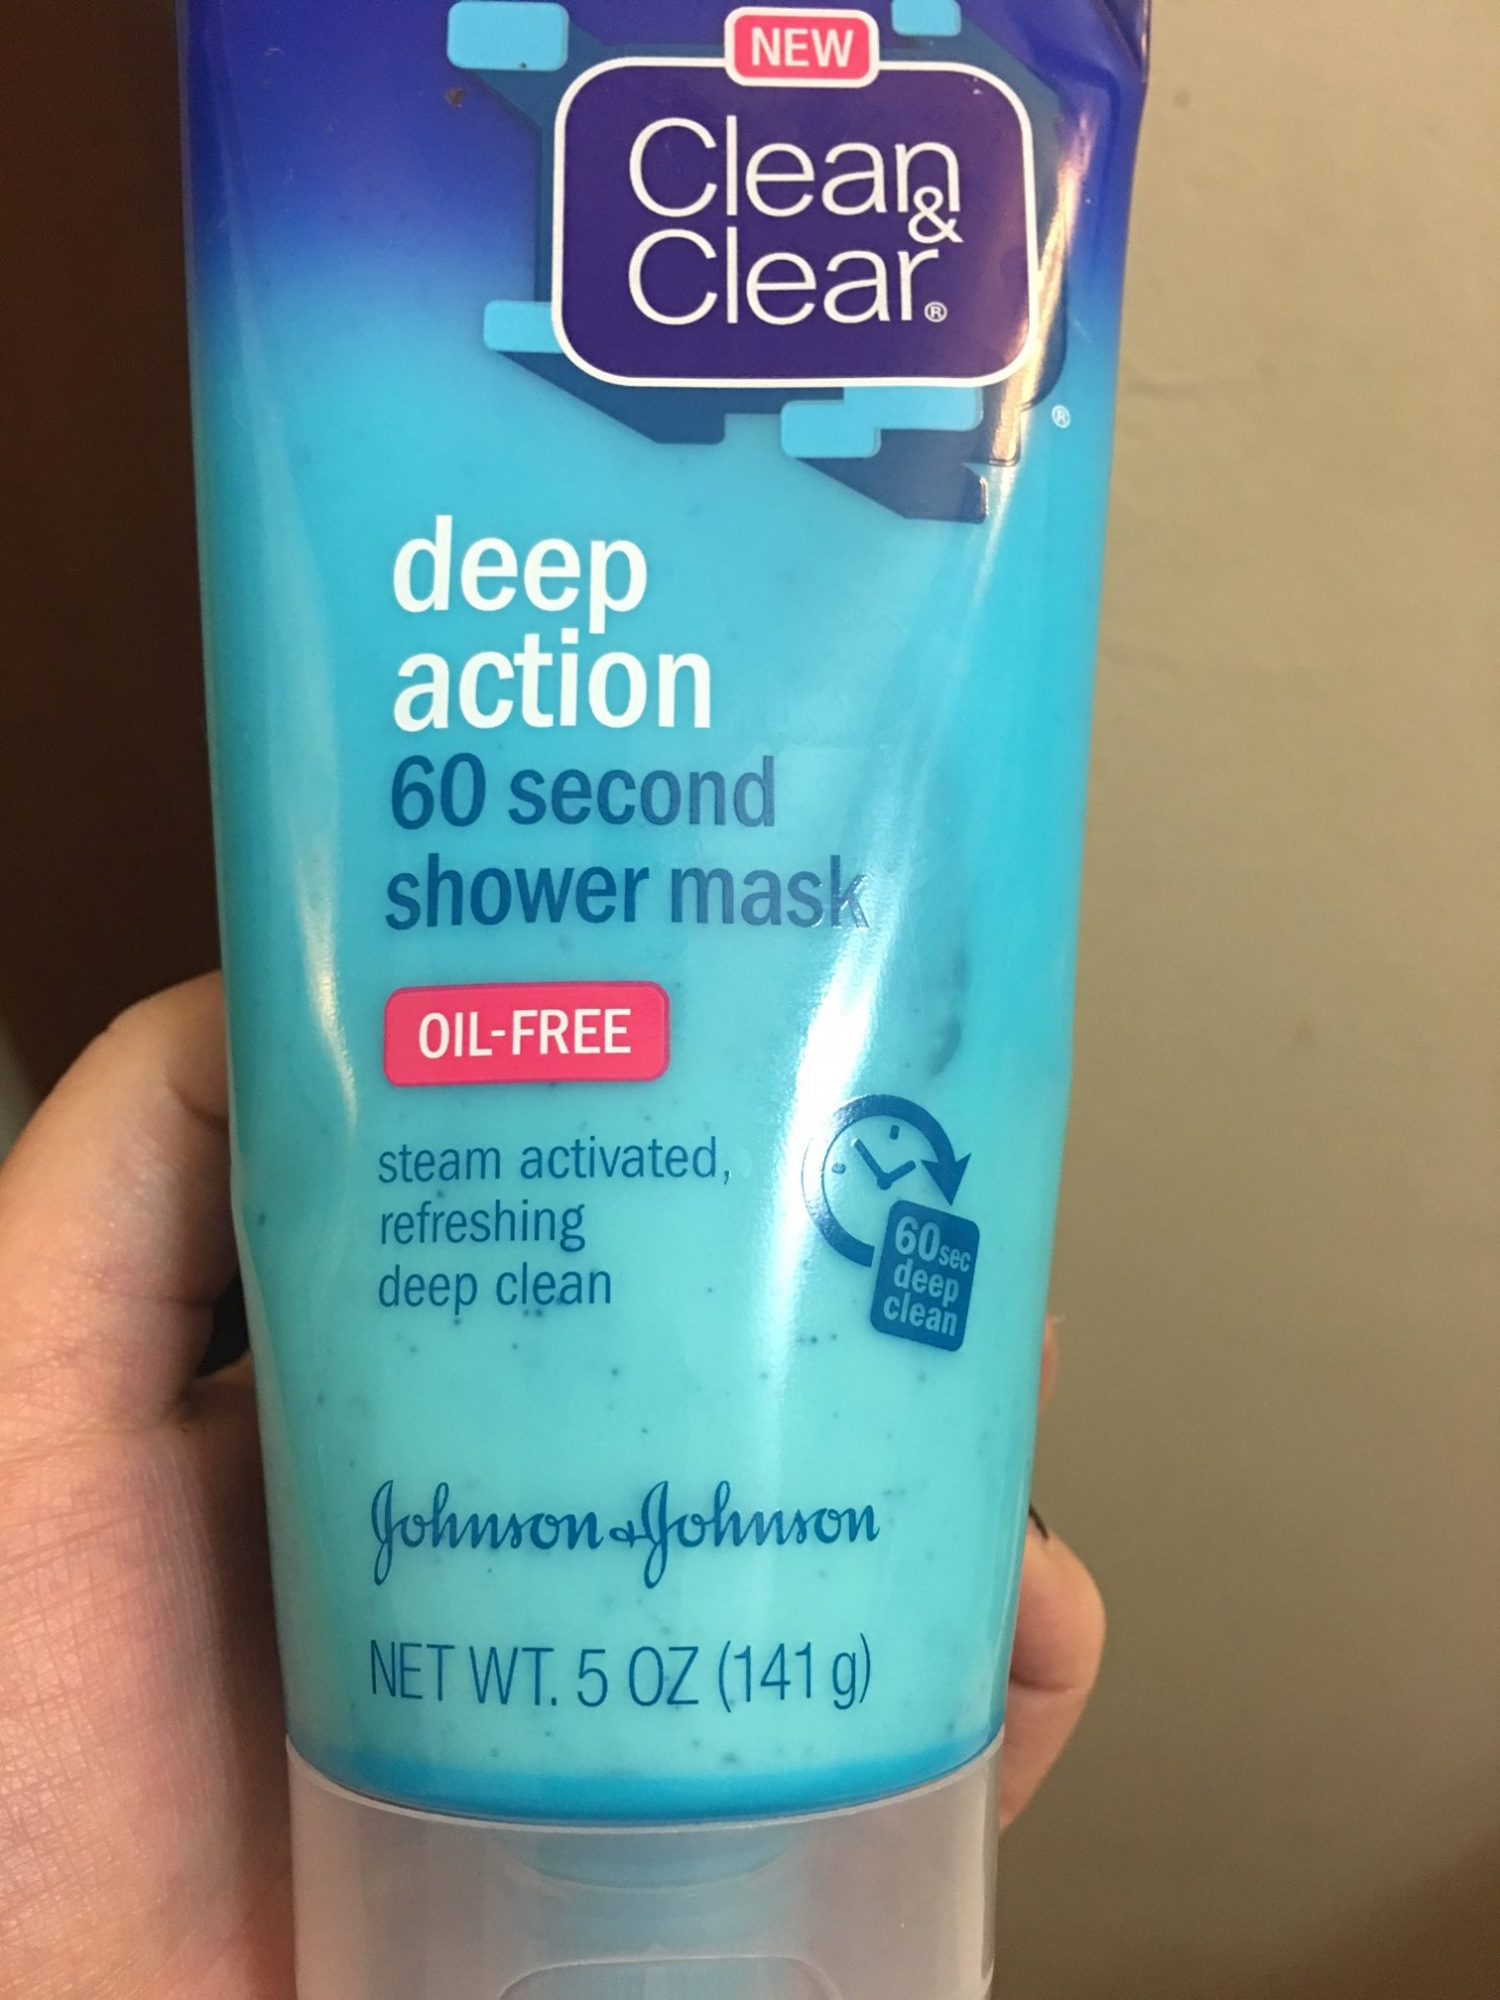 cleanandclear.jpg